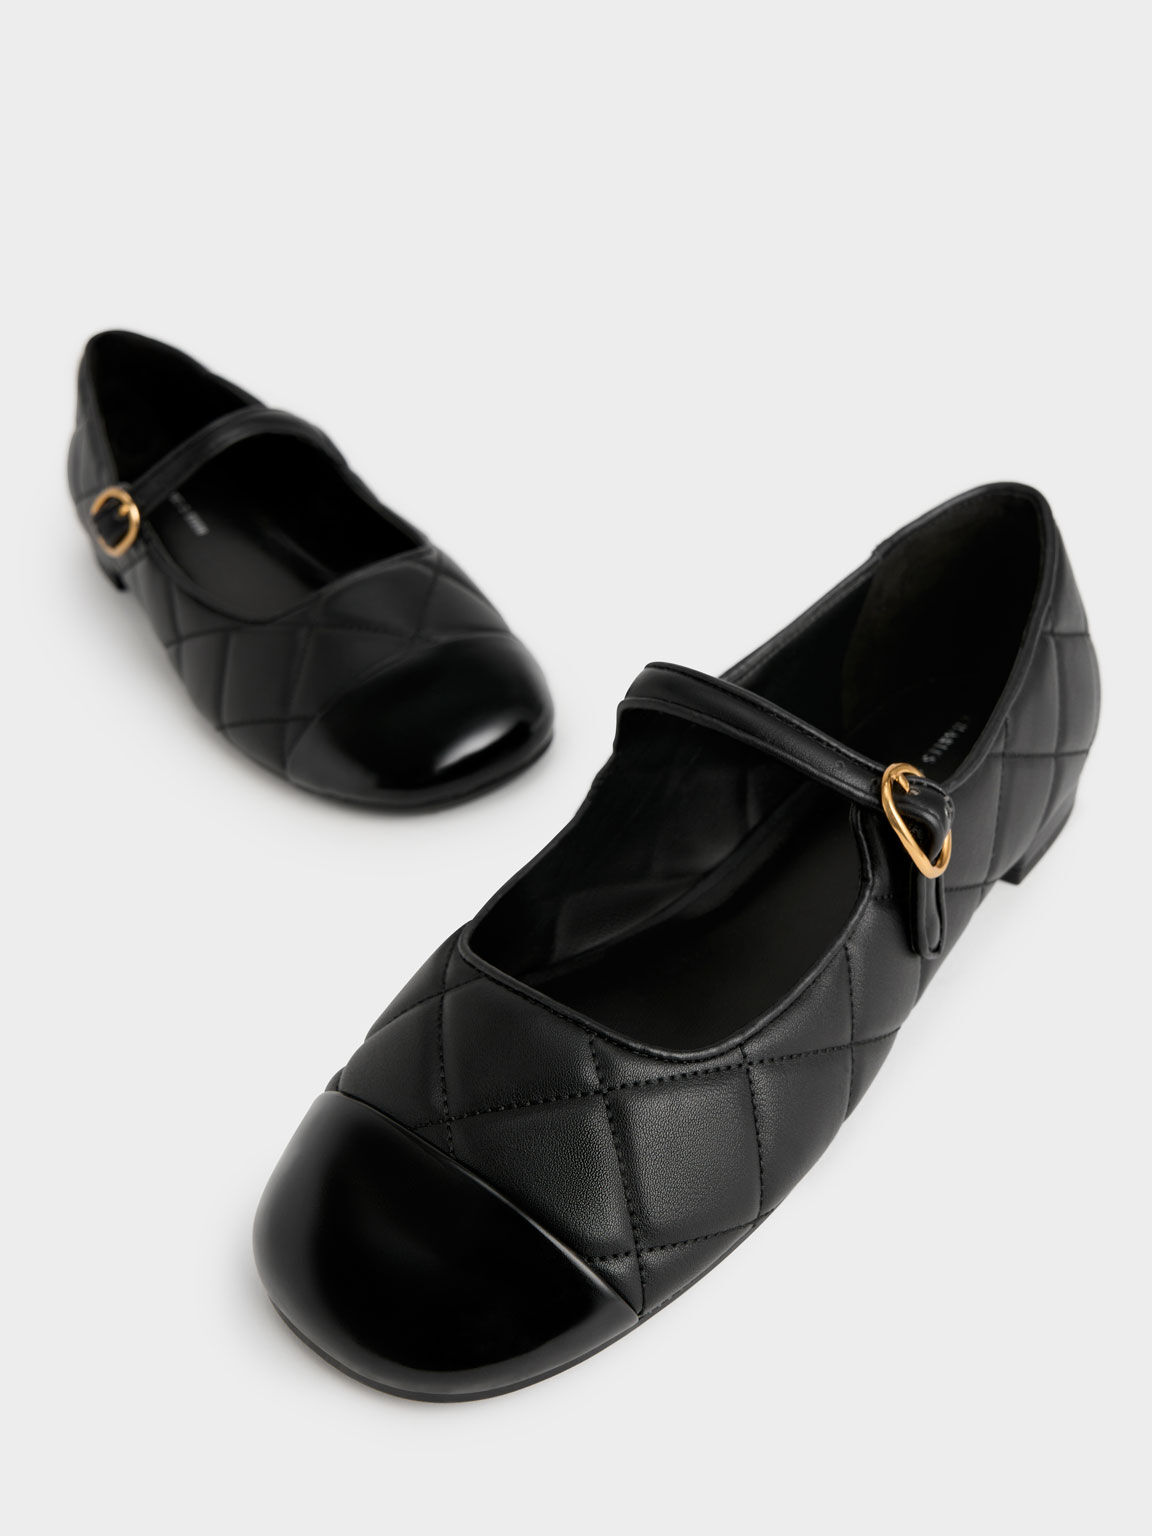 Toe-Cap Quilted Mary Janes, Black, hi-res